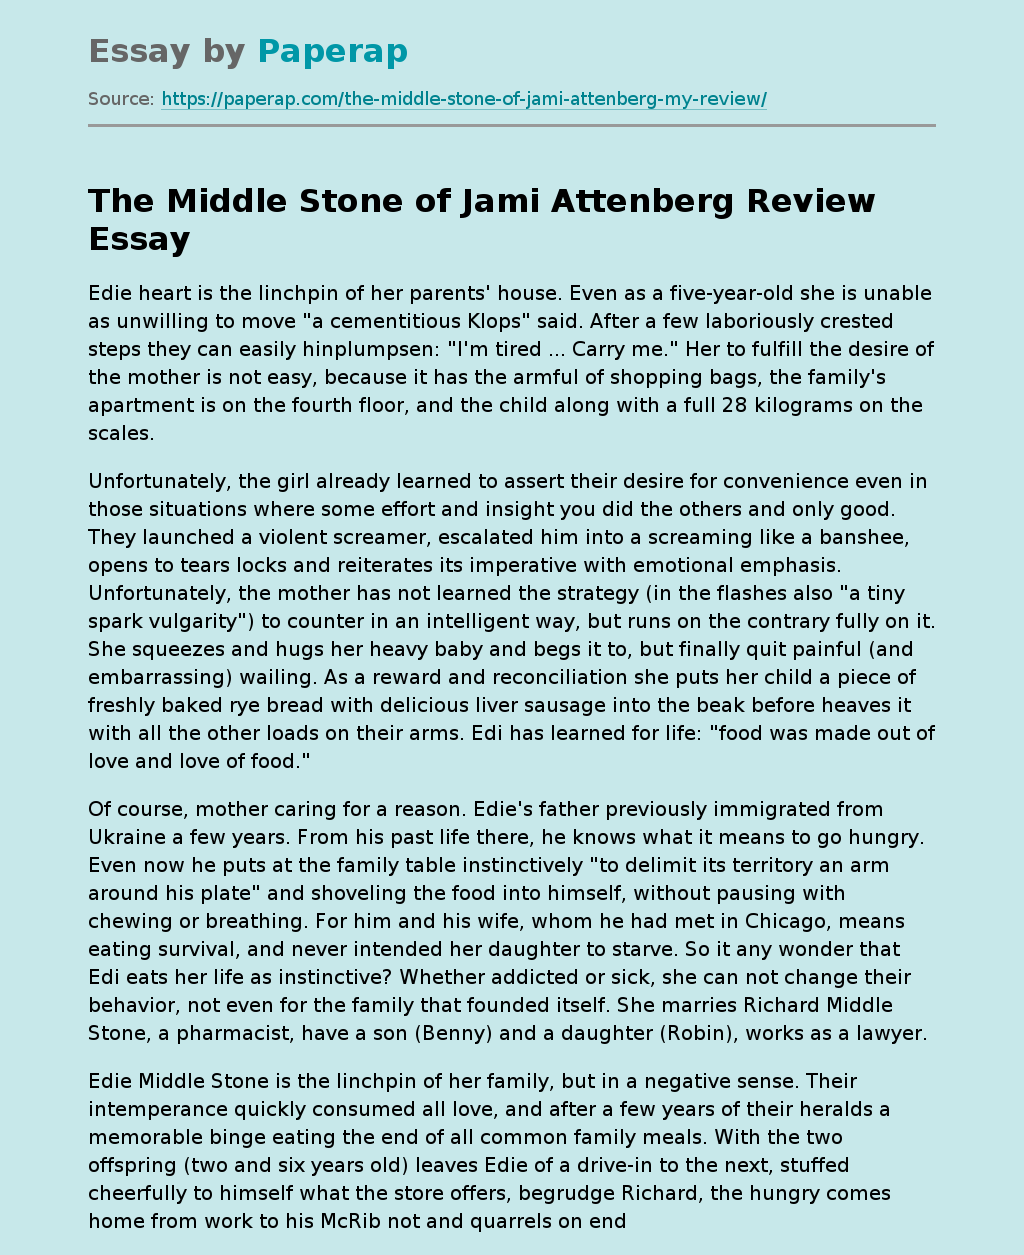 The Middle Stone of Jami Attenberg Review